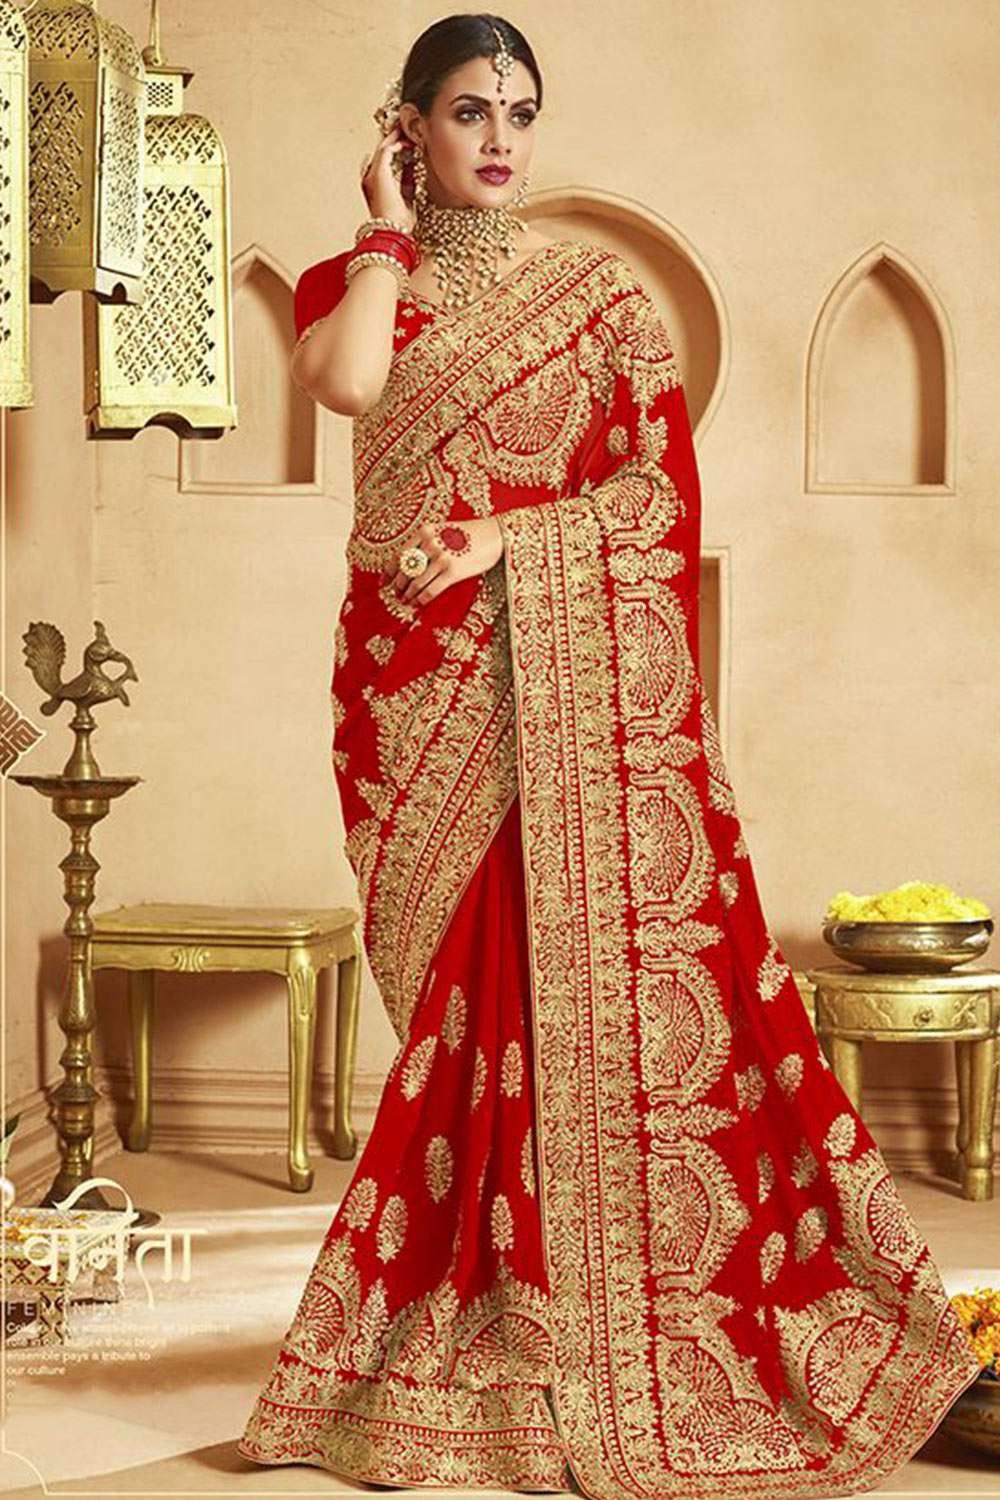 Buy Bridal Saree Online For Women @ Best Price In India | YOYO Fashion